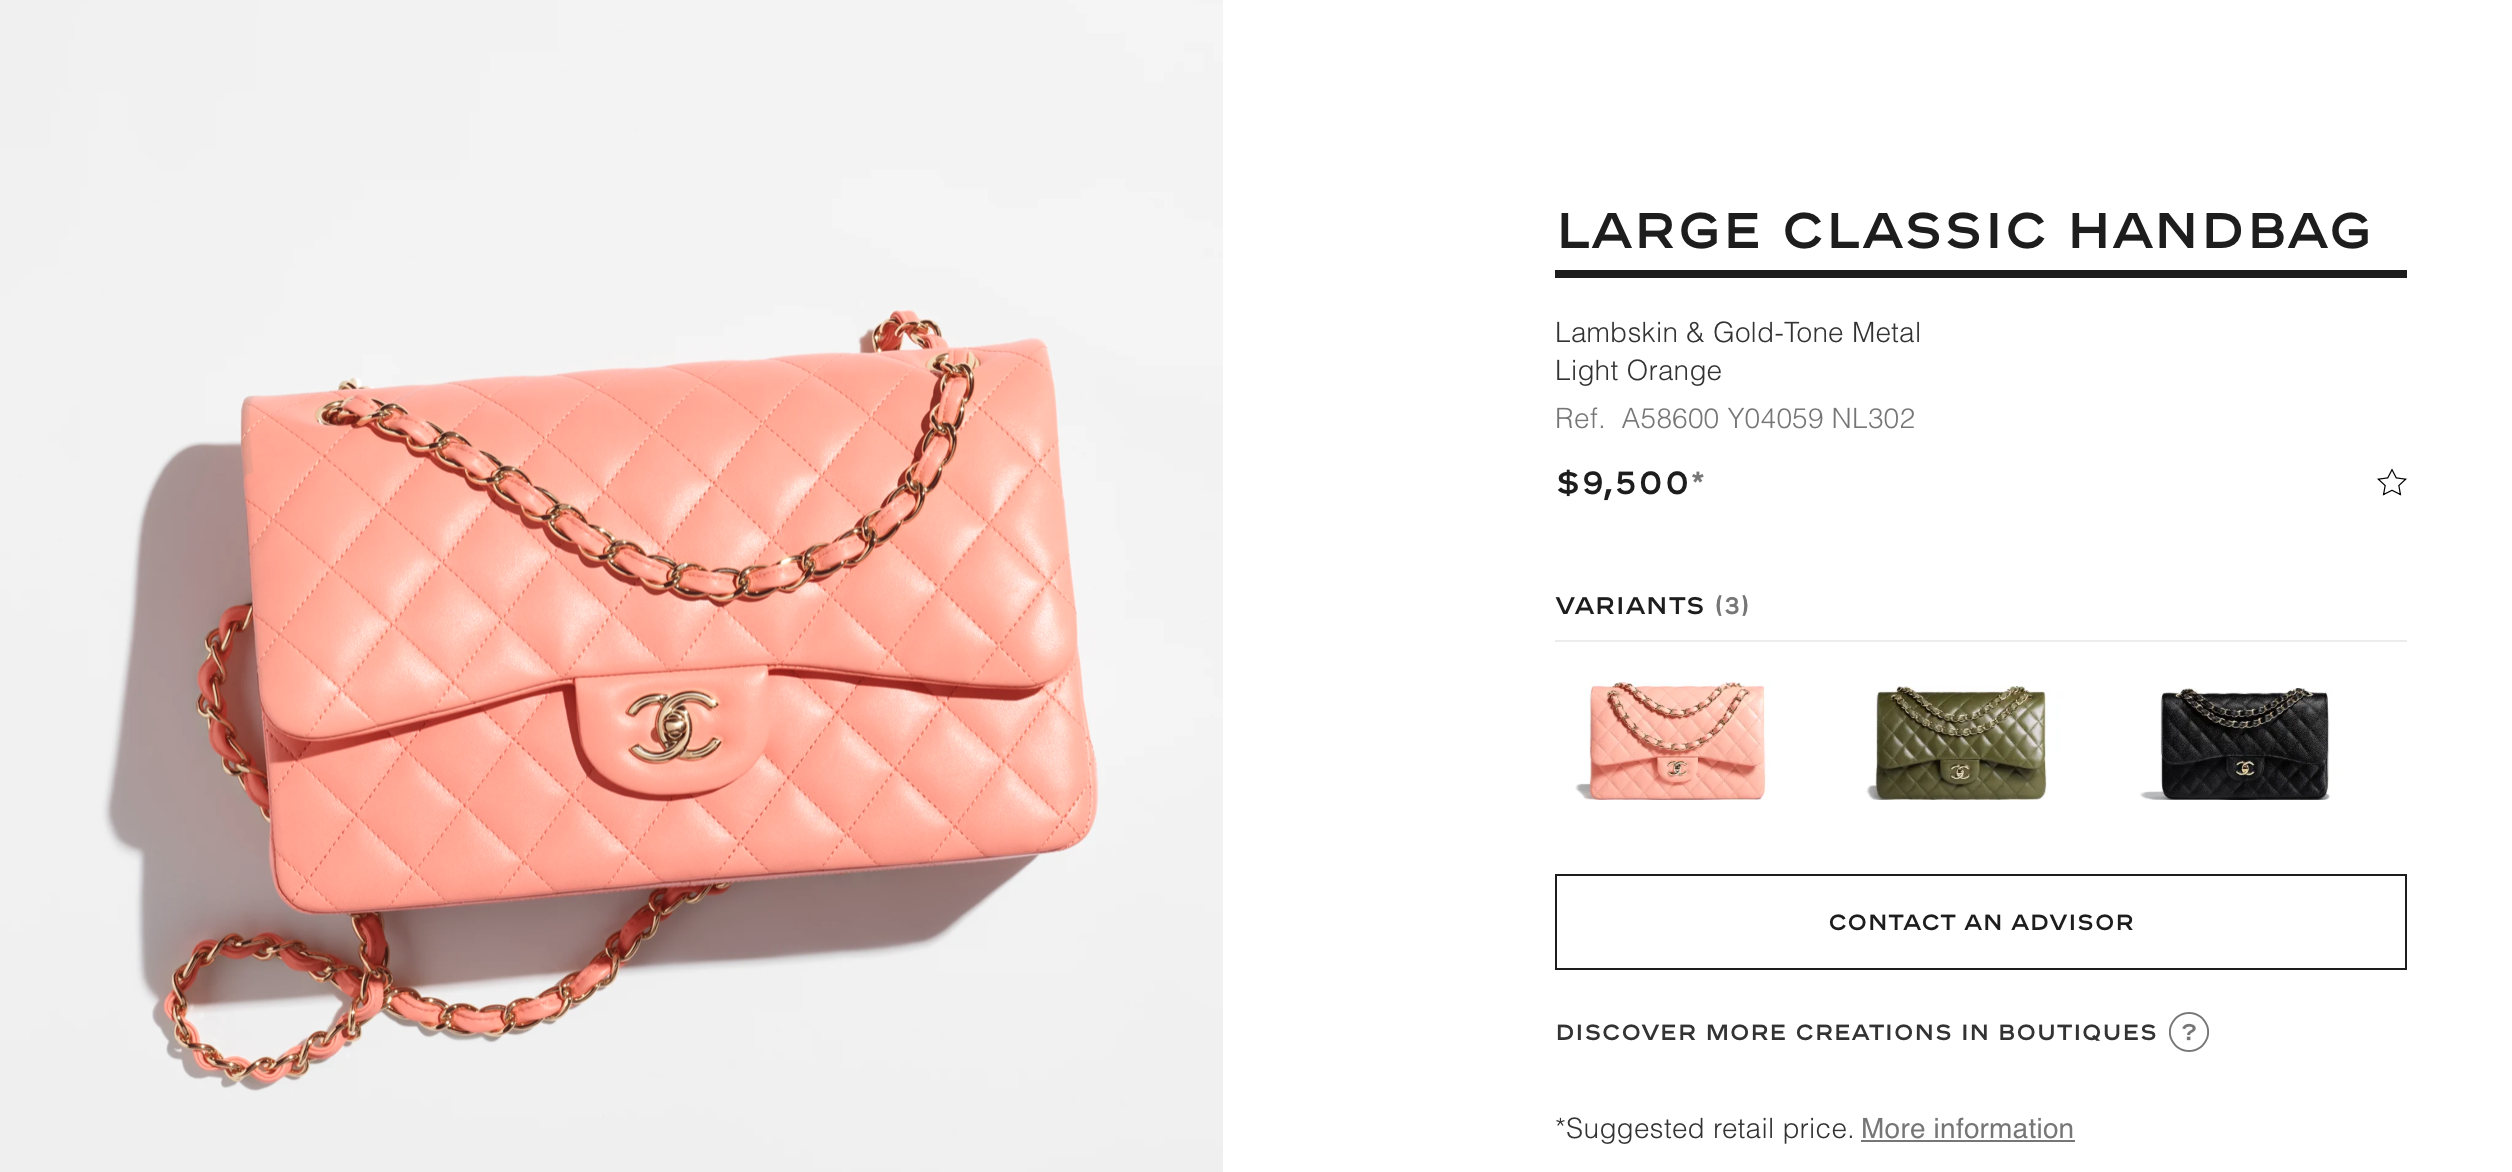 Chanel Classic Flap Bag Prices 2020  Collecting Luxury